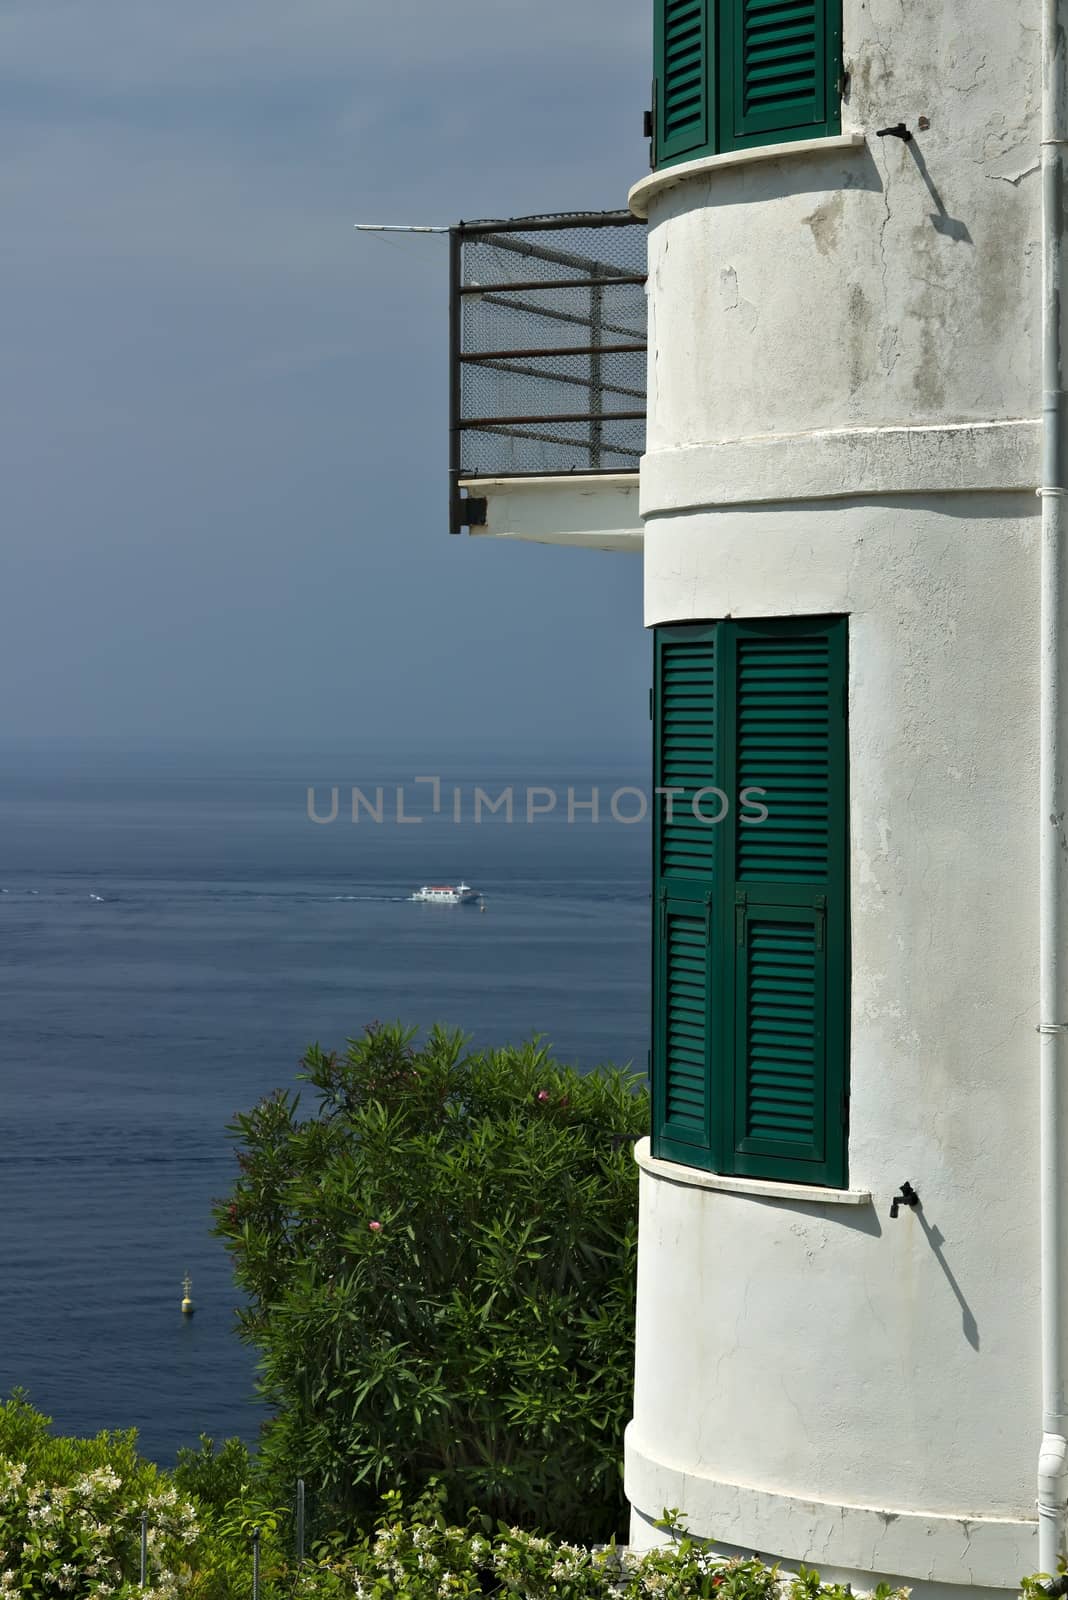 A modern-looking house in a village in the Cinque Terre. (Province of La Spezia)